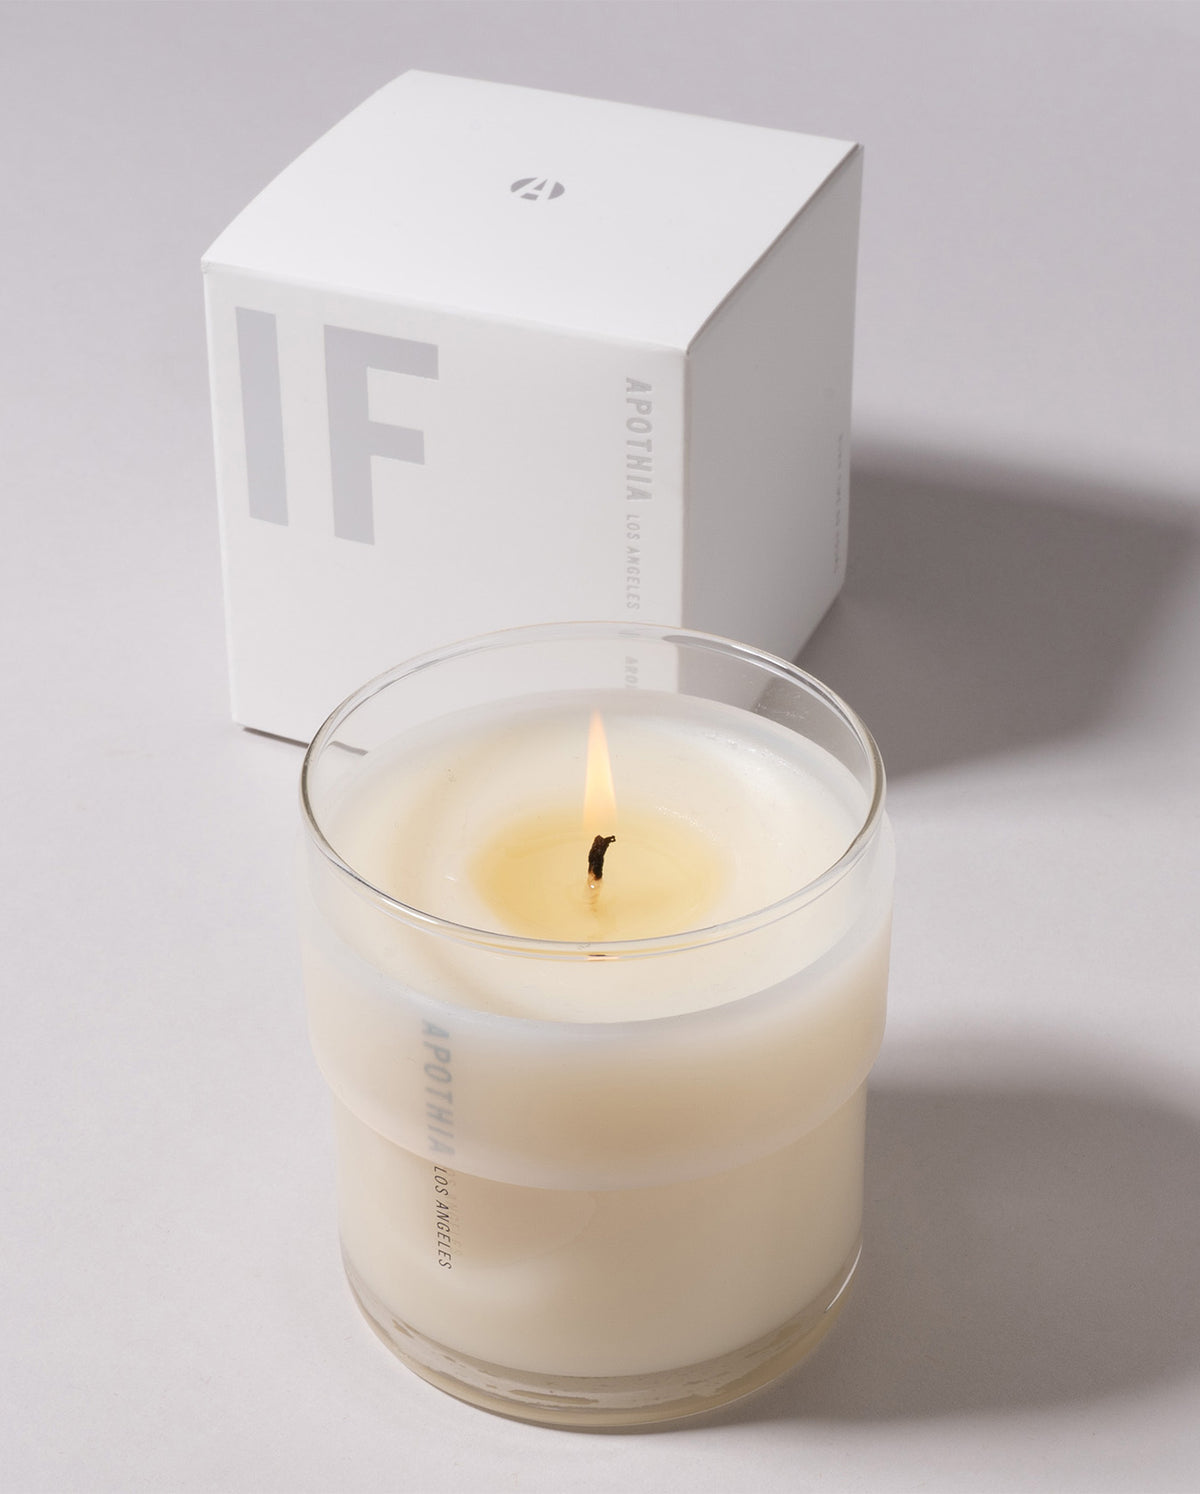 IF Candle